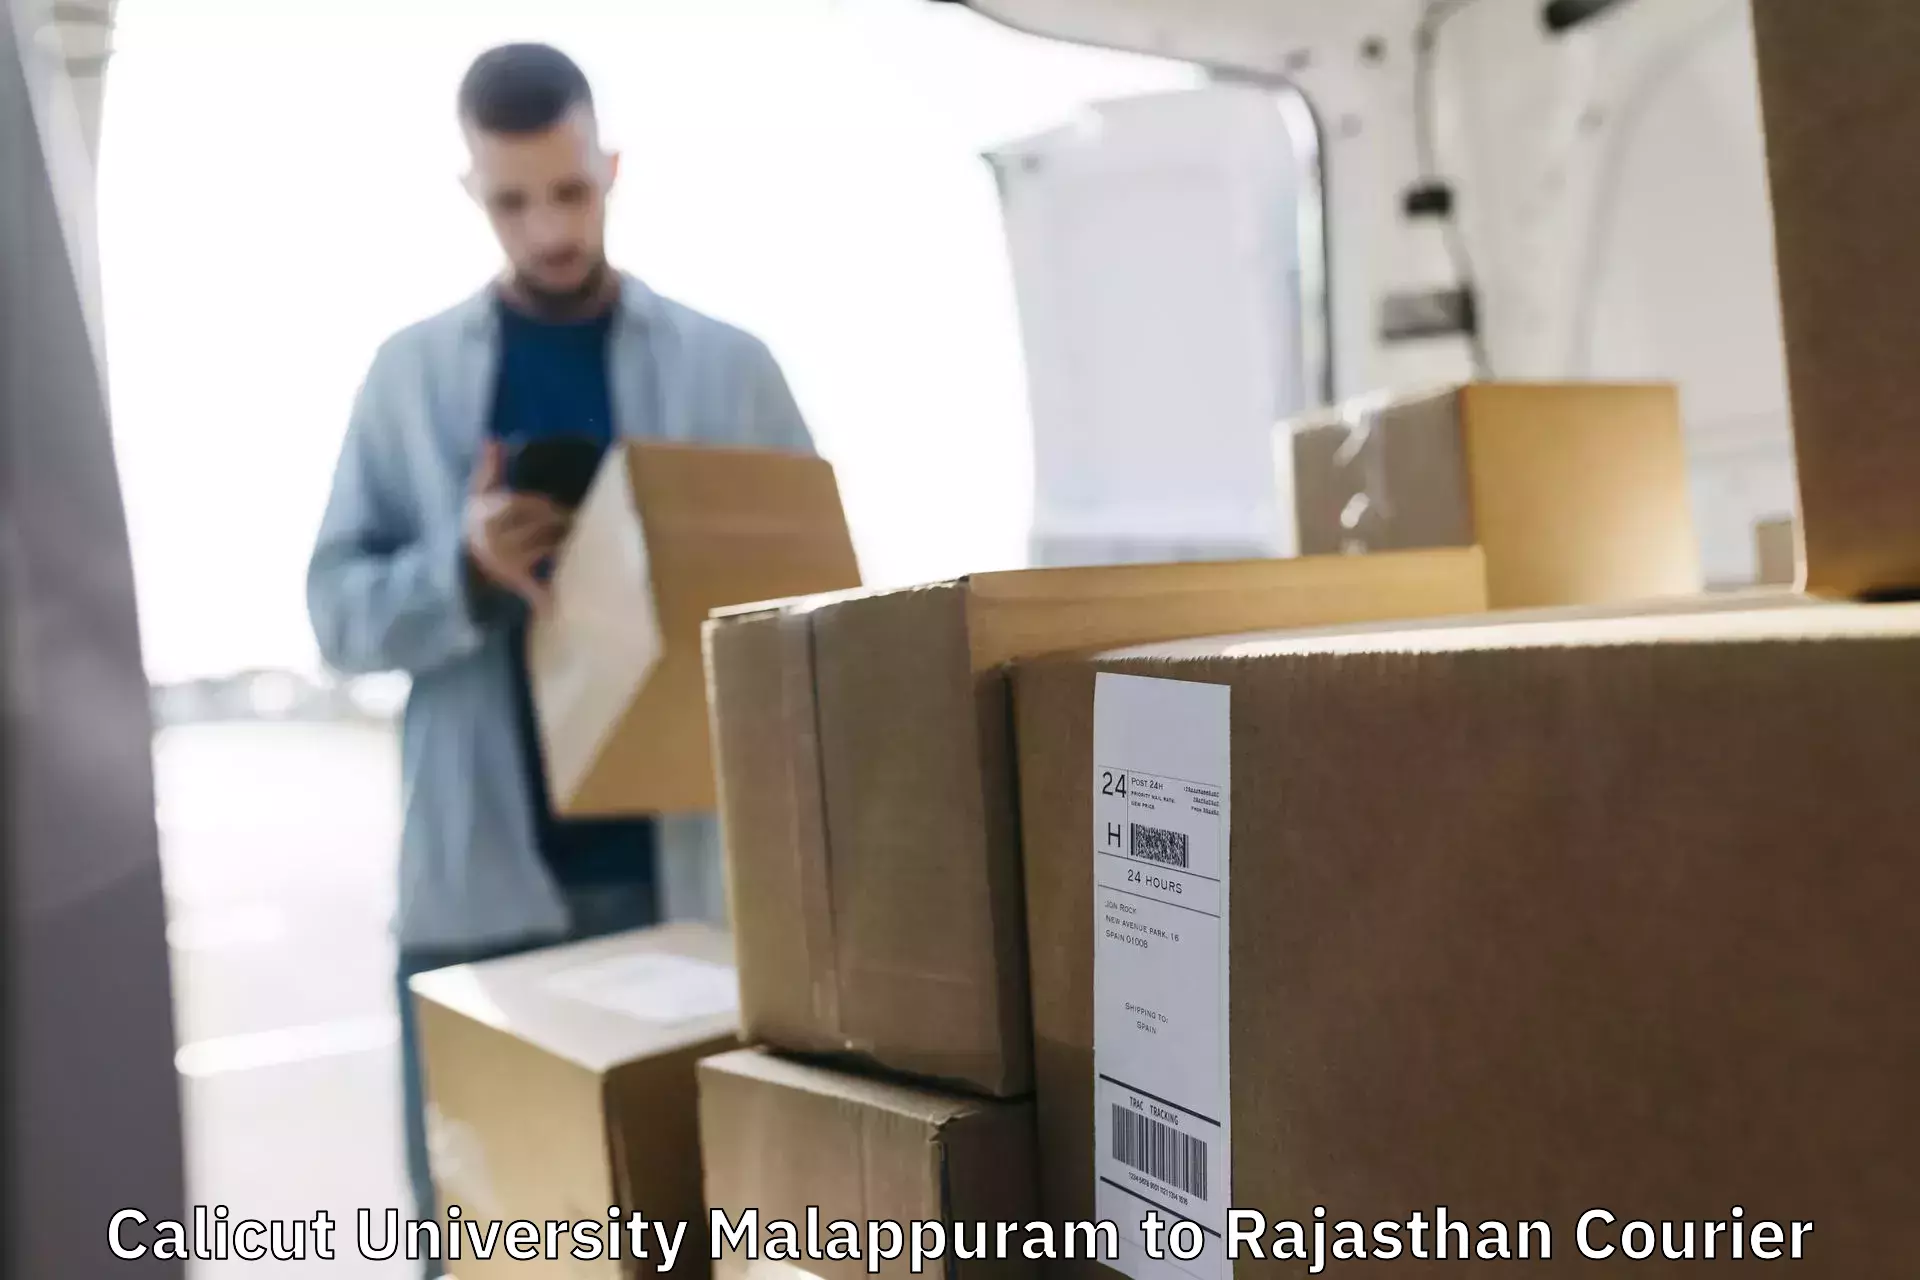 Global courier networks Calicut University Malappuram to Rajasthan